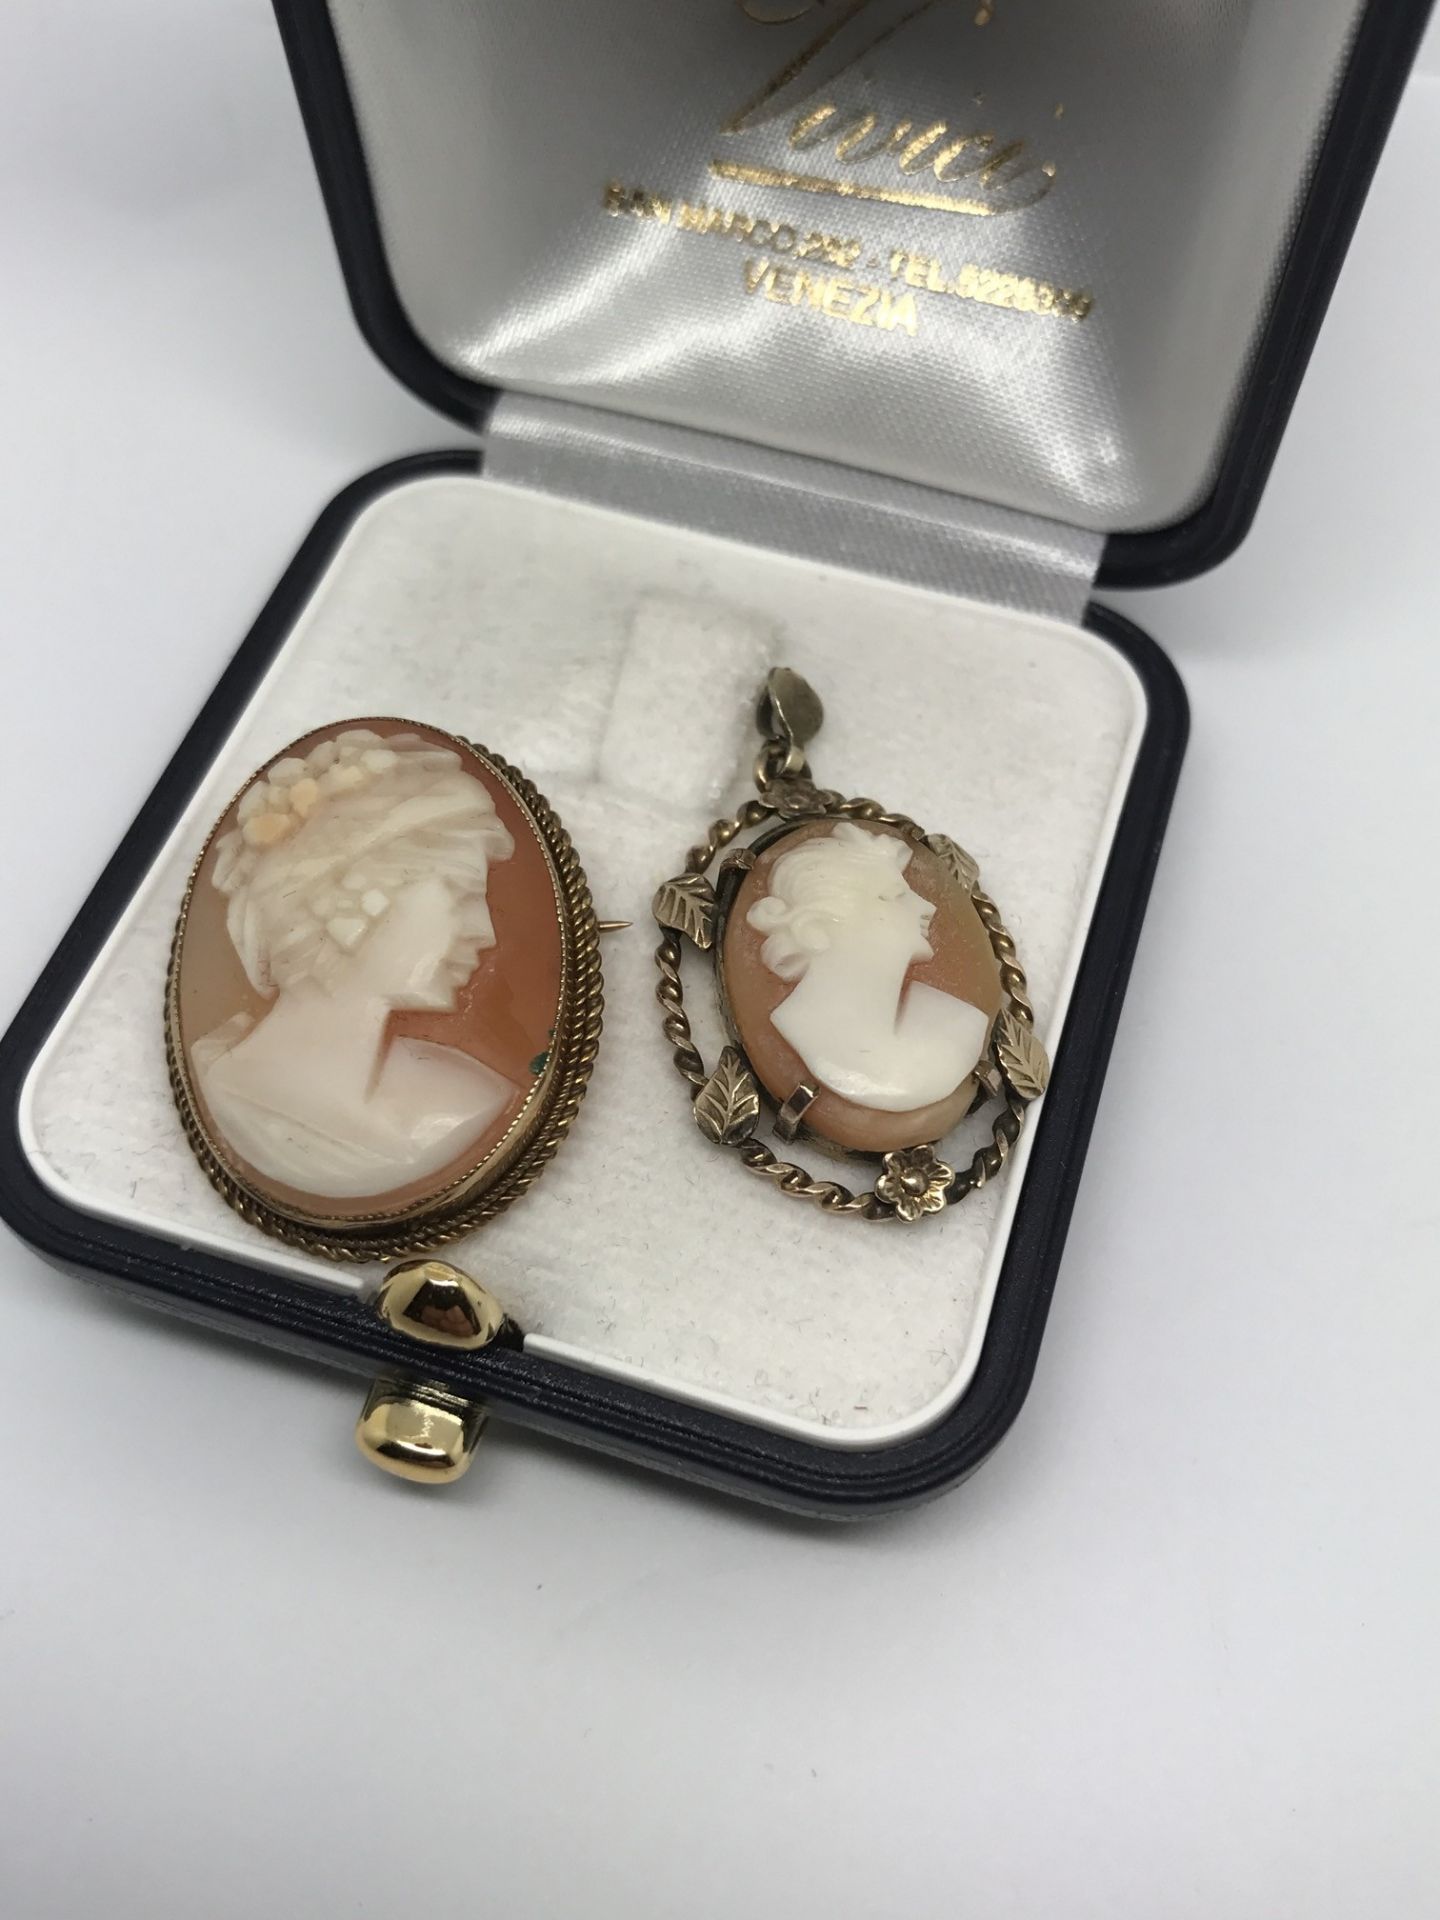 9ct GOLD CAMEO BROOCH + 1 GOLD COLOURED CAMEO LOCKET